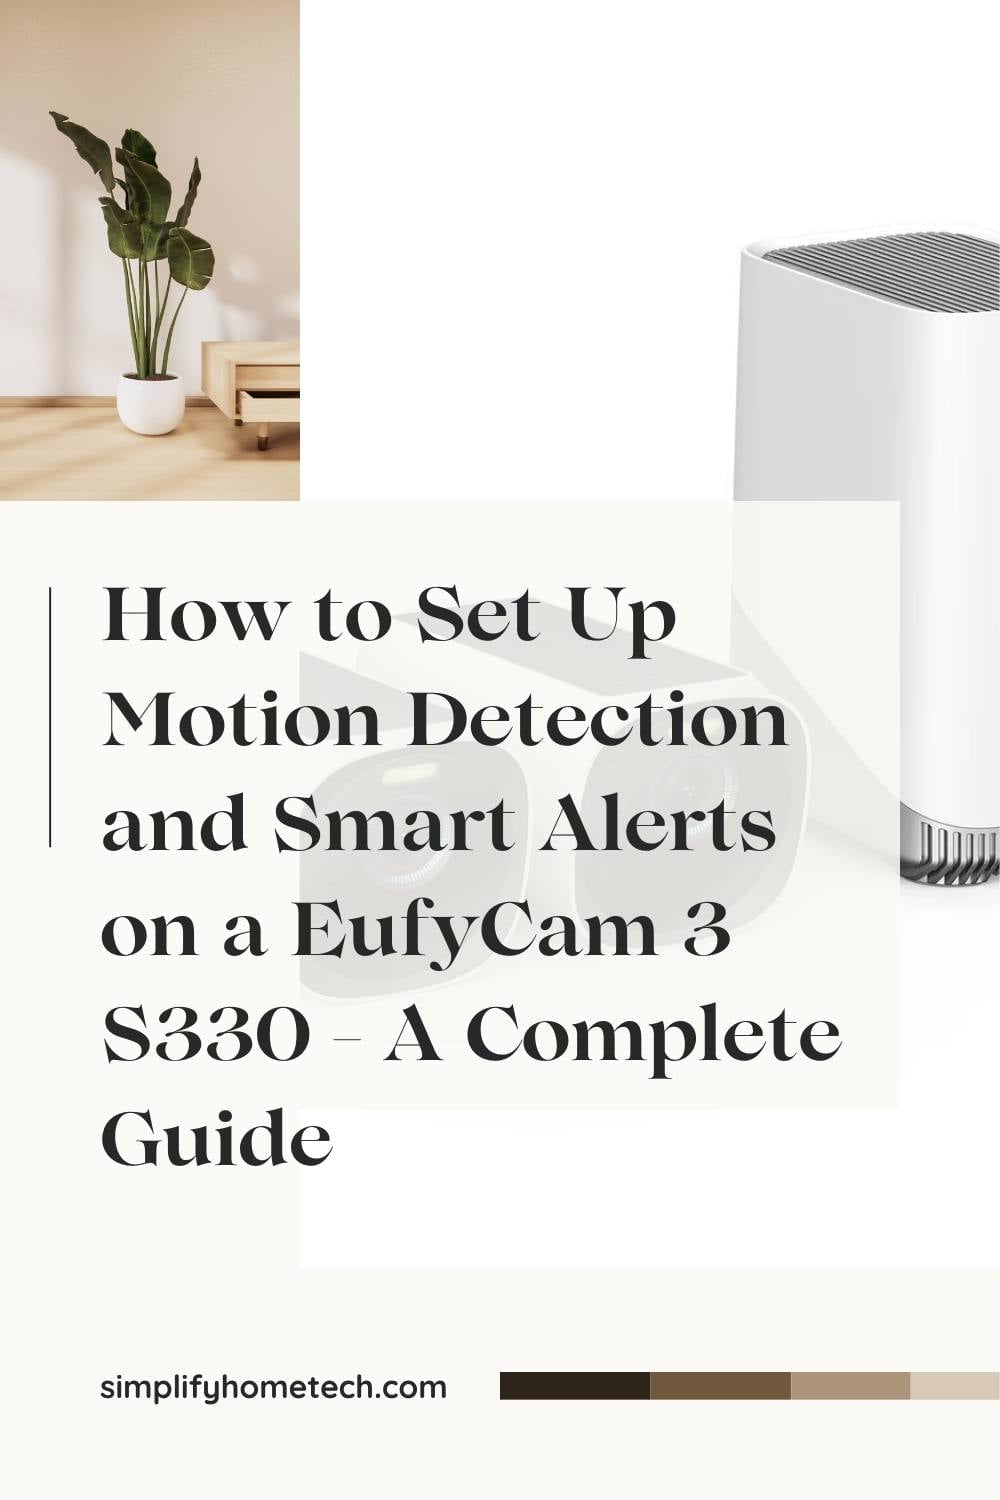 How to Set Up Motion Detection and Smart Alerts on a EufyCam 3 S330